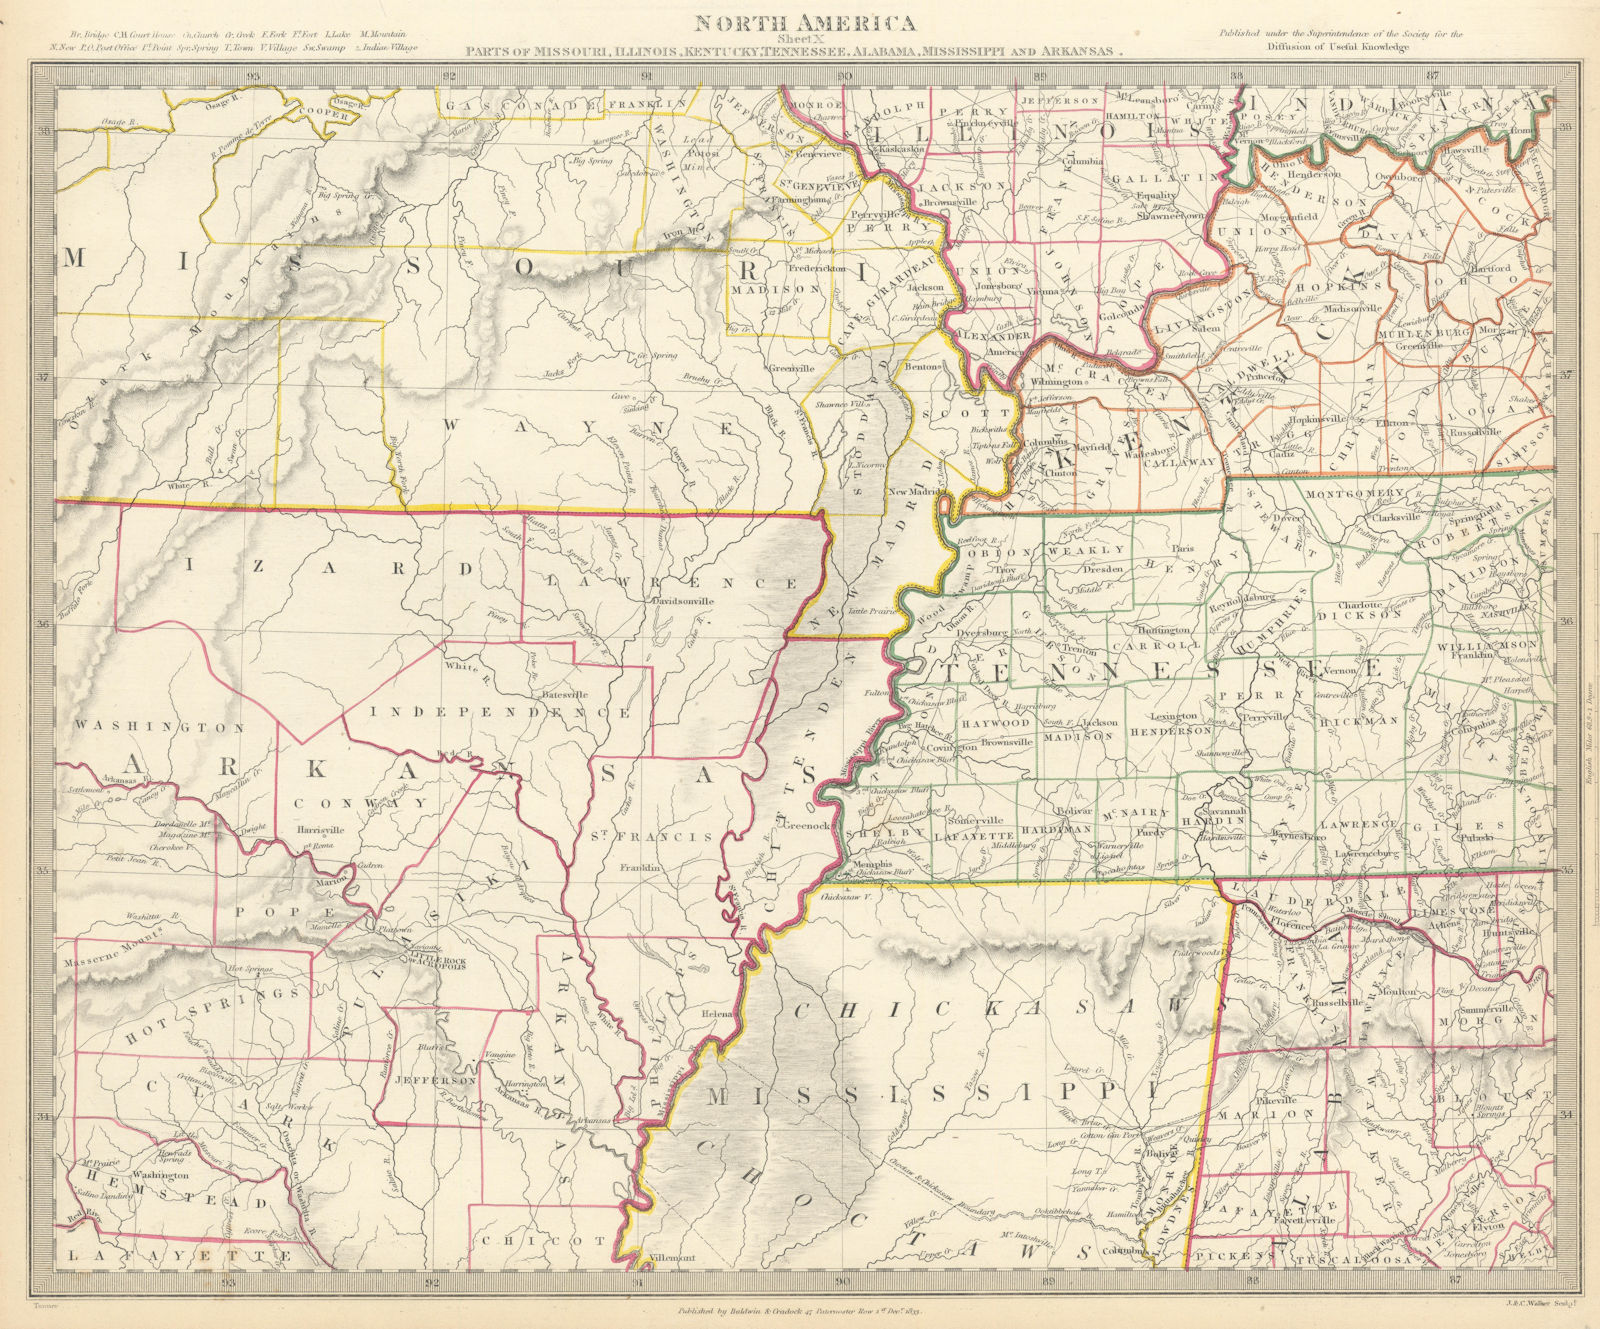 USA. AR MO TN MS IL IN KY AL. Choctaw Chickasaw boundaries. SDUK 1844 old map